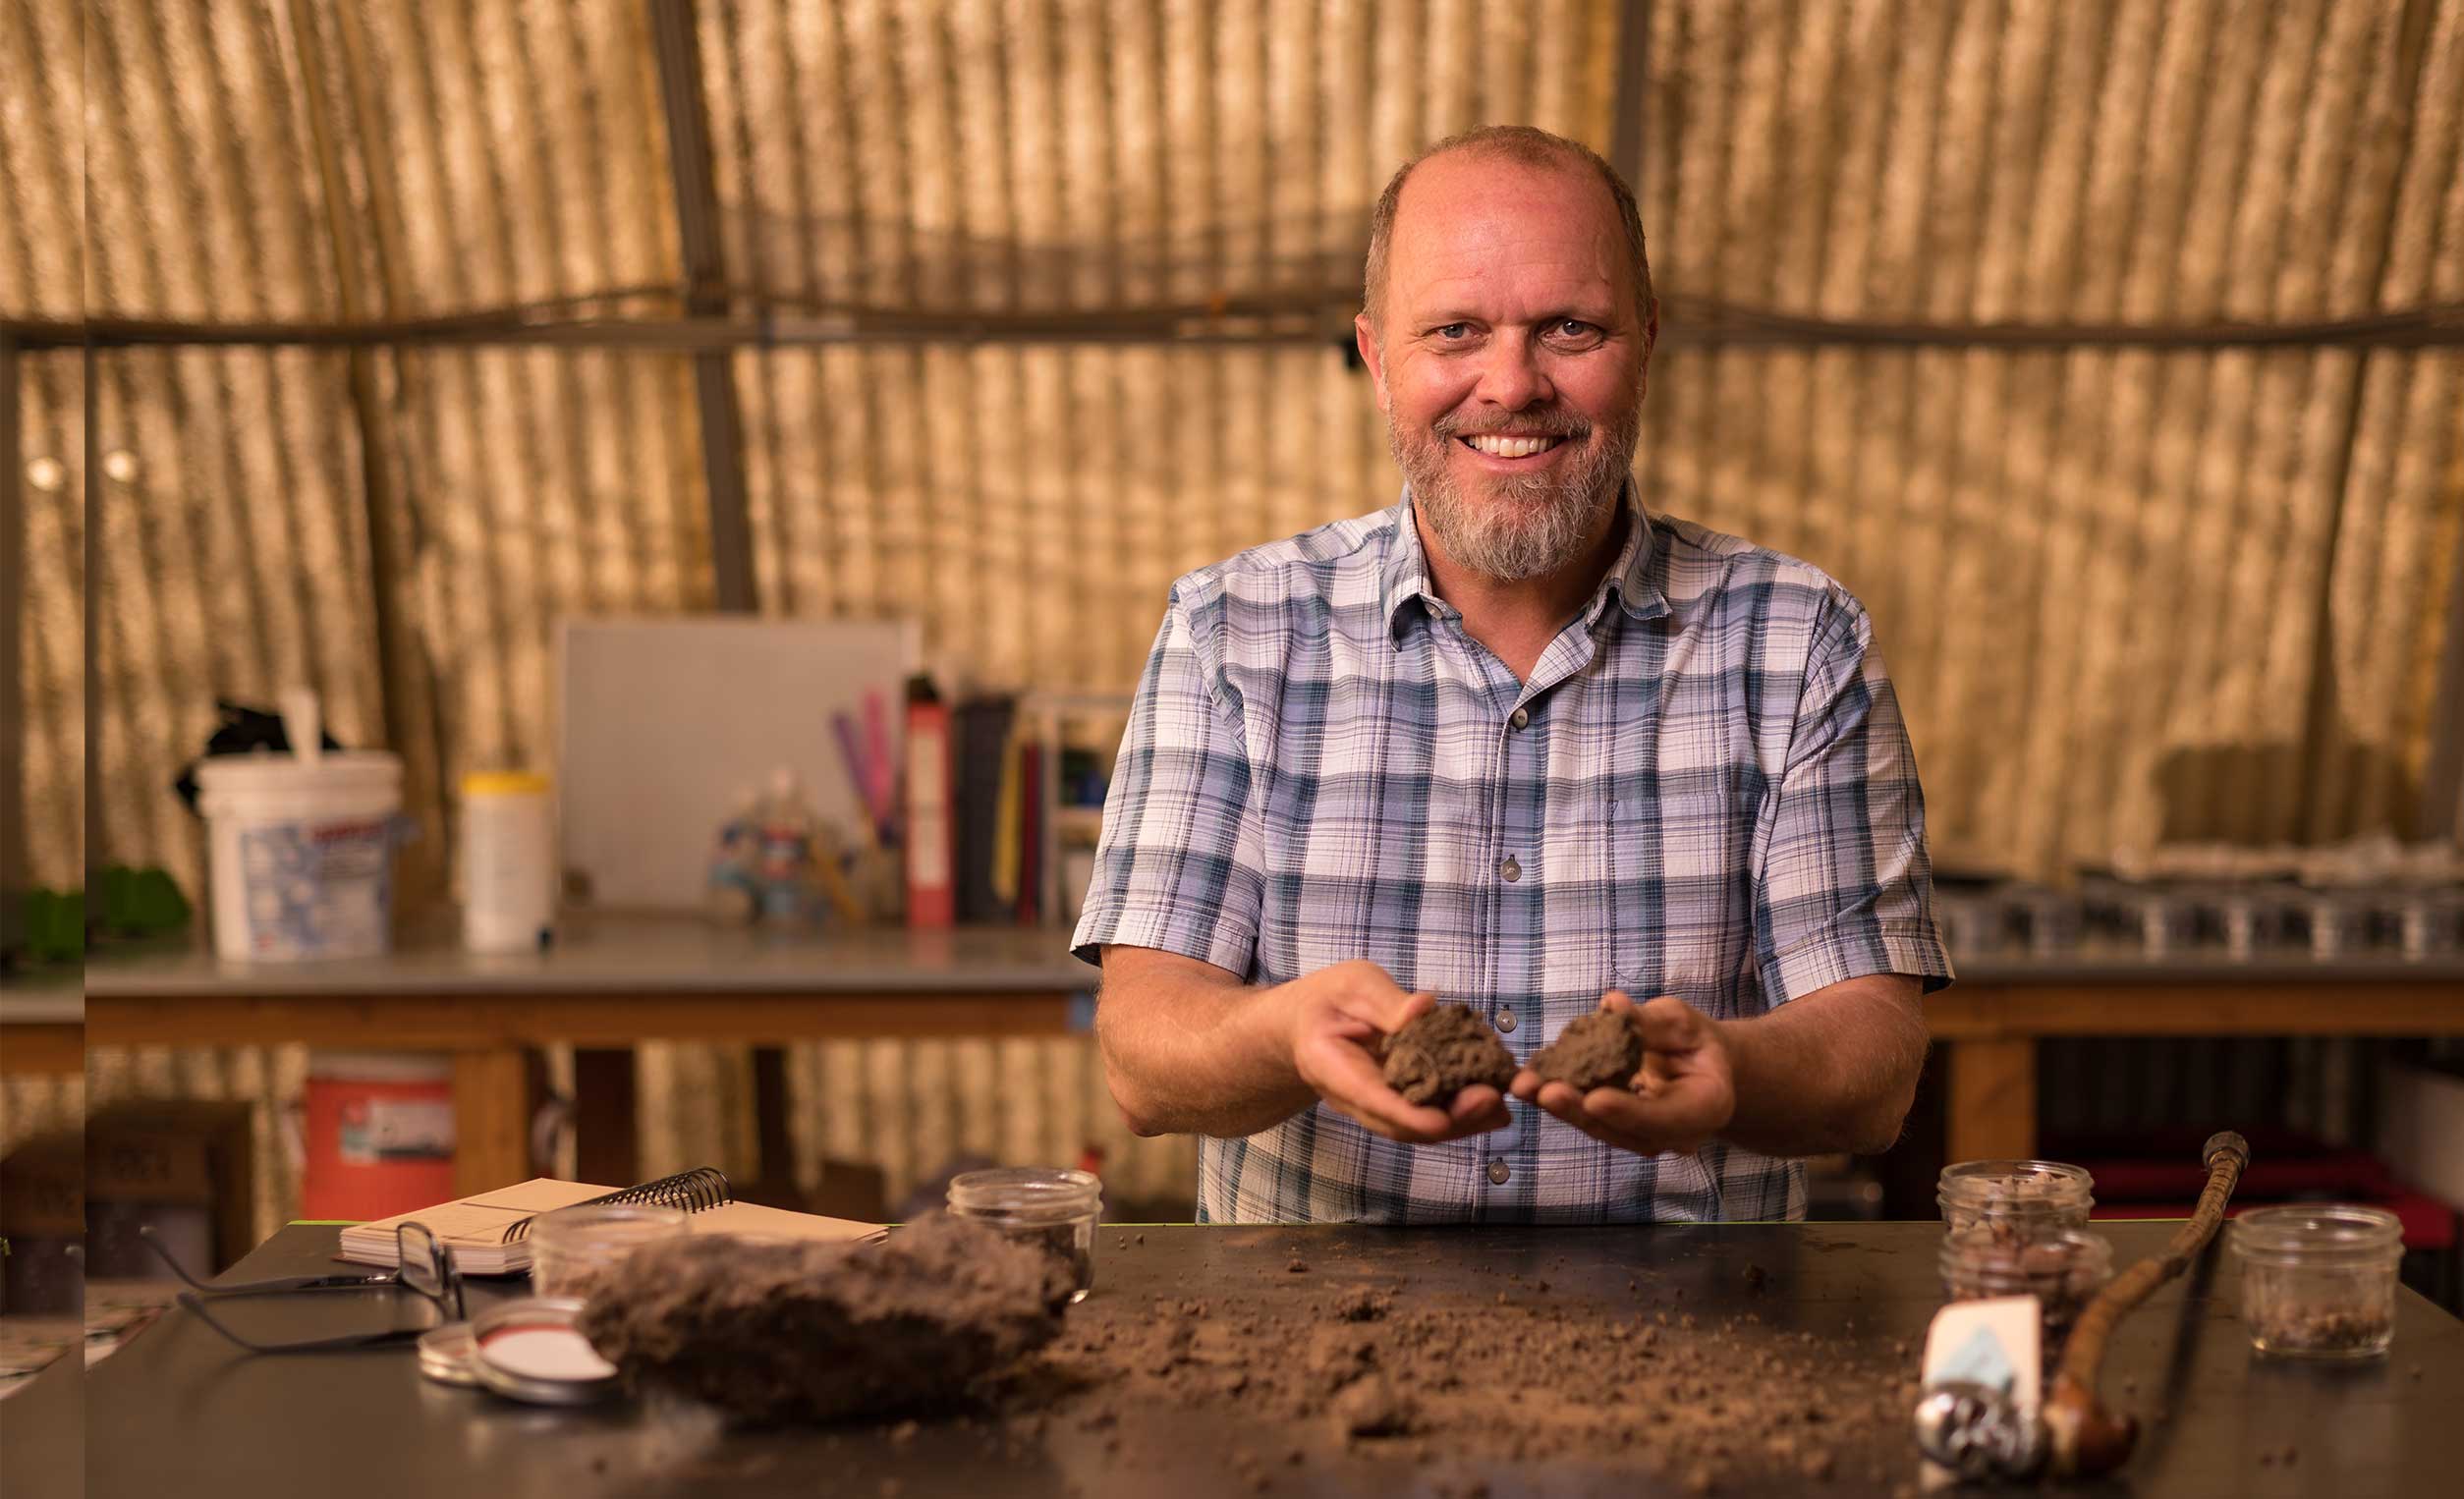 Professor Garrett Liles holds samples of soil in each hand. He is standing at a table inside the soil sampling area of the regenerative agriculture lab.